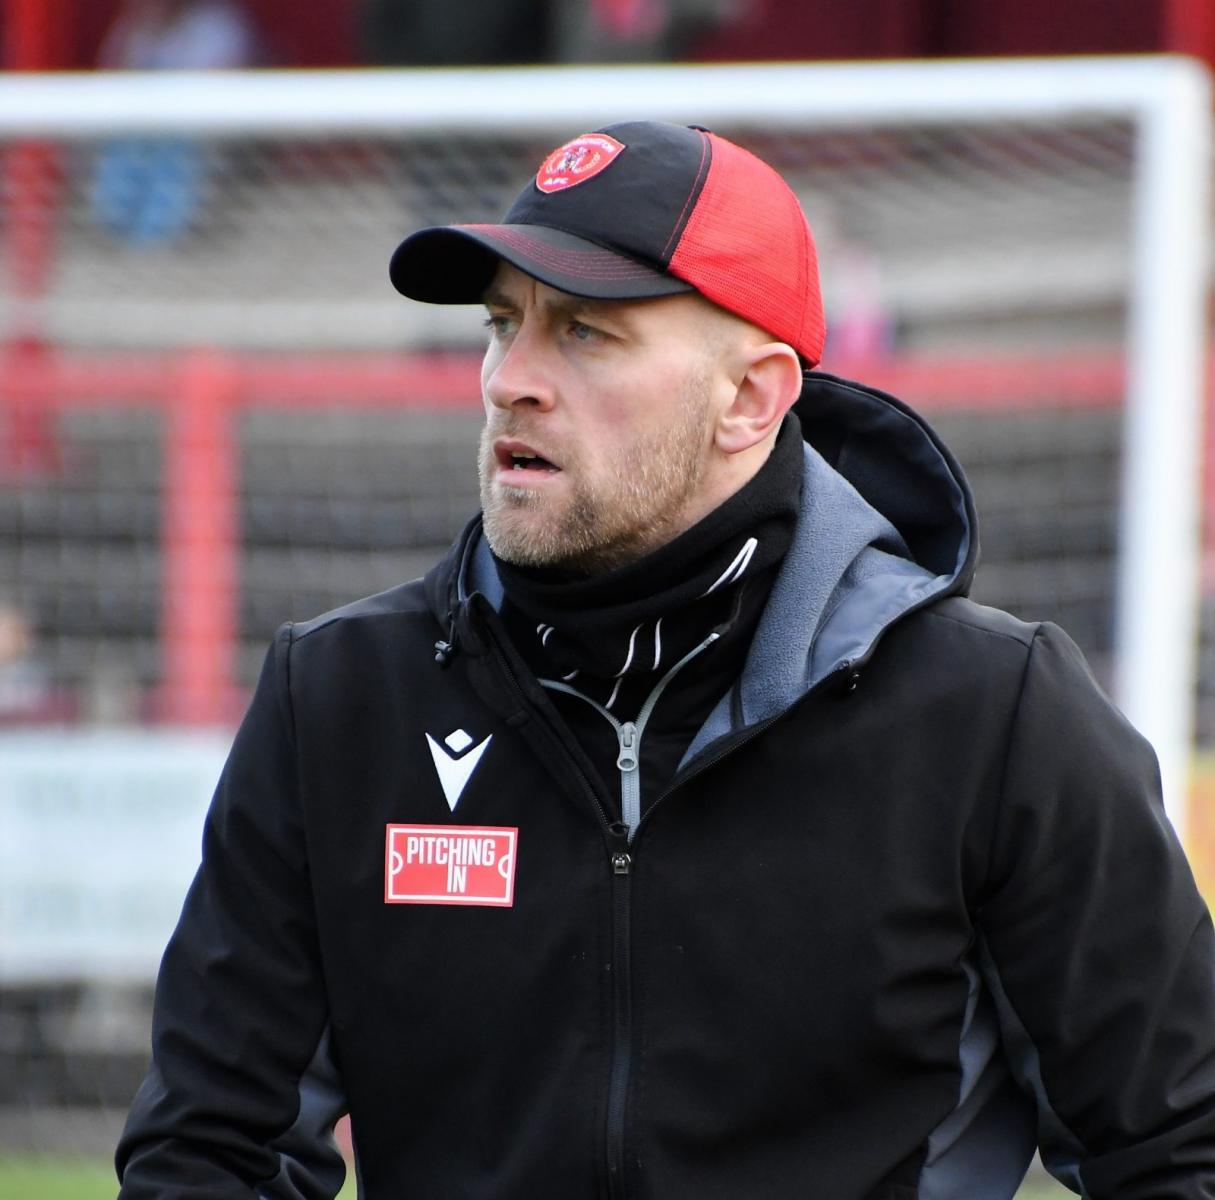 Disappointment-for-Danny-Grainger-and-the-Reds-Ben-Challis